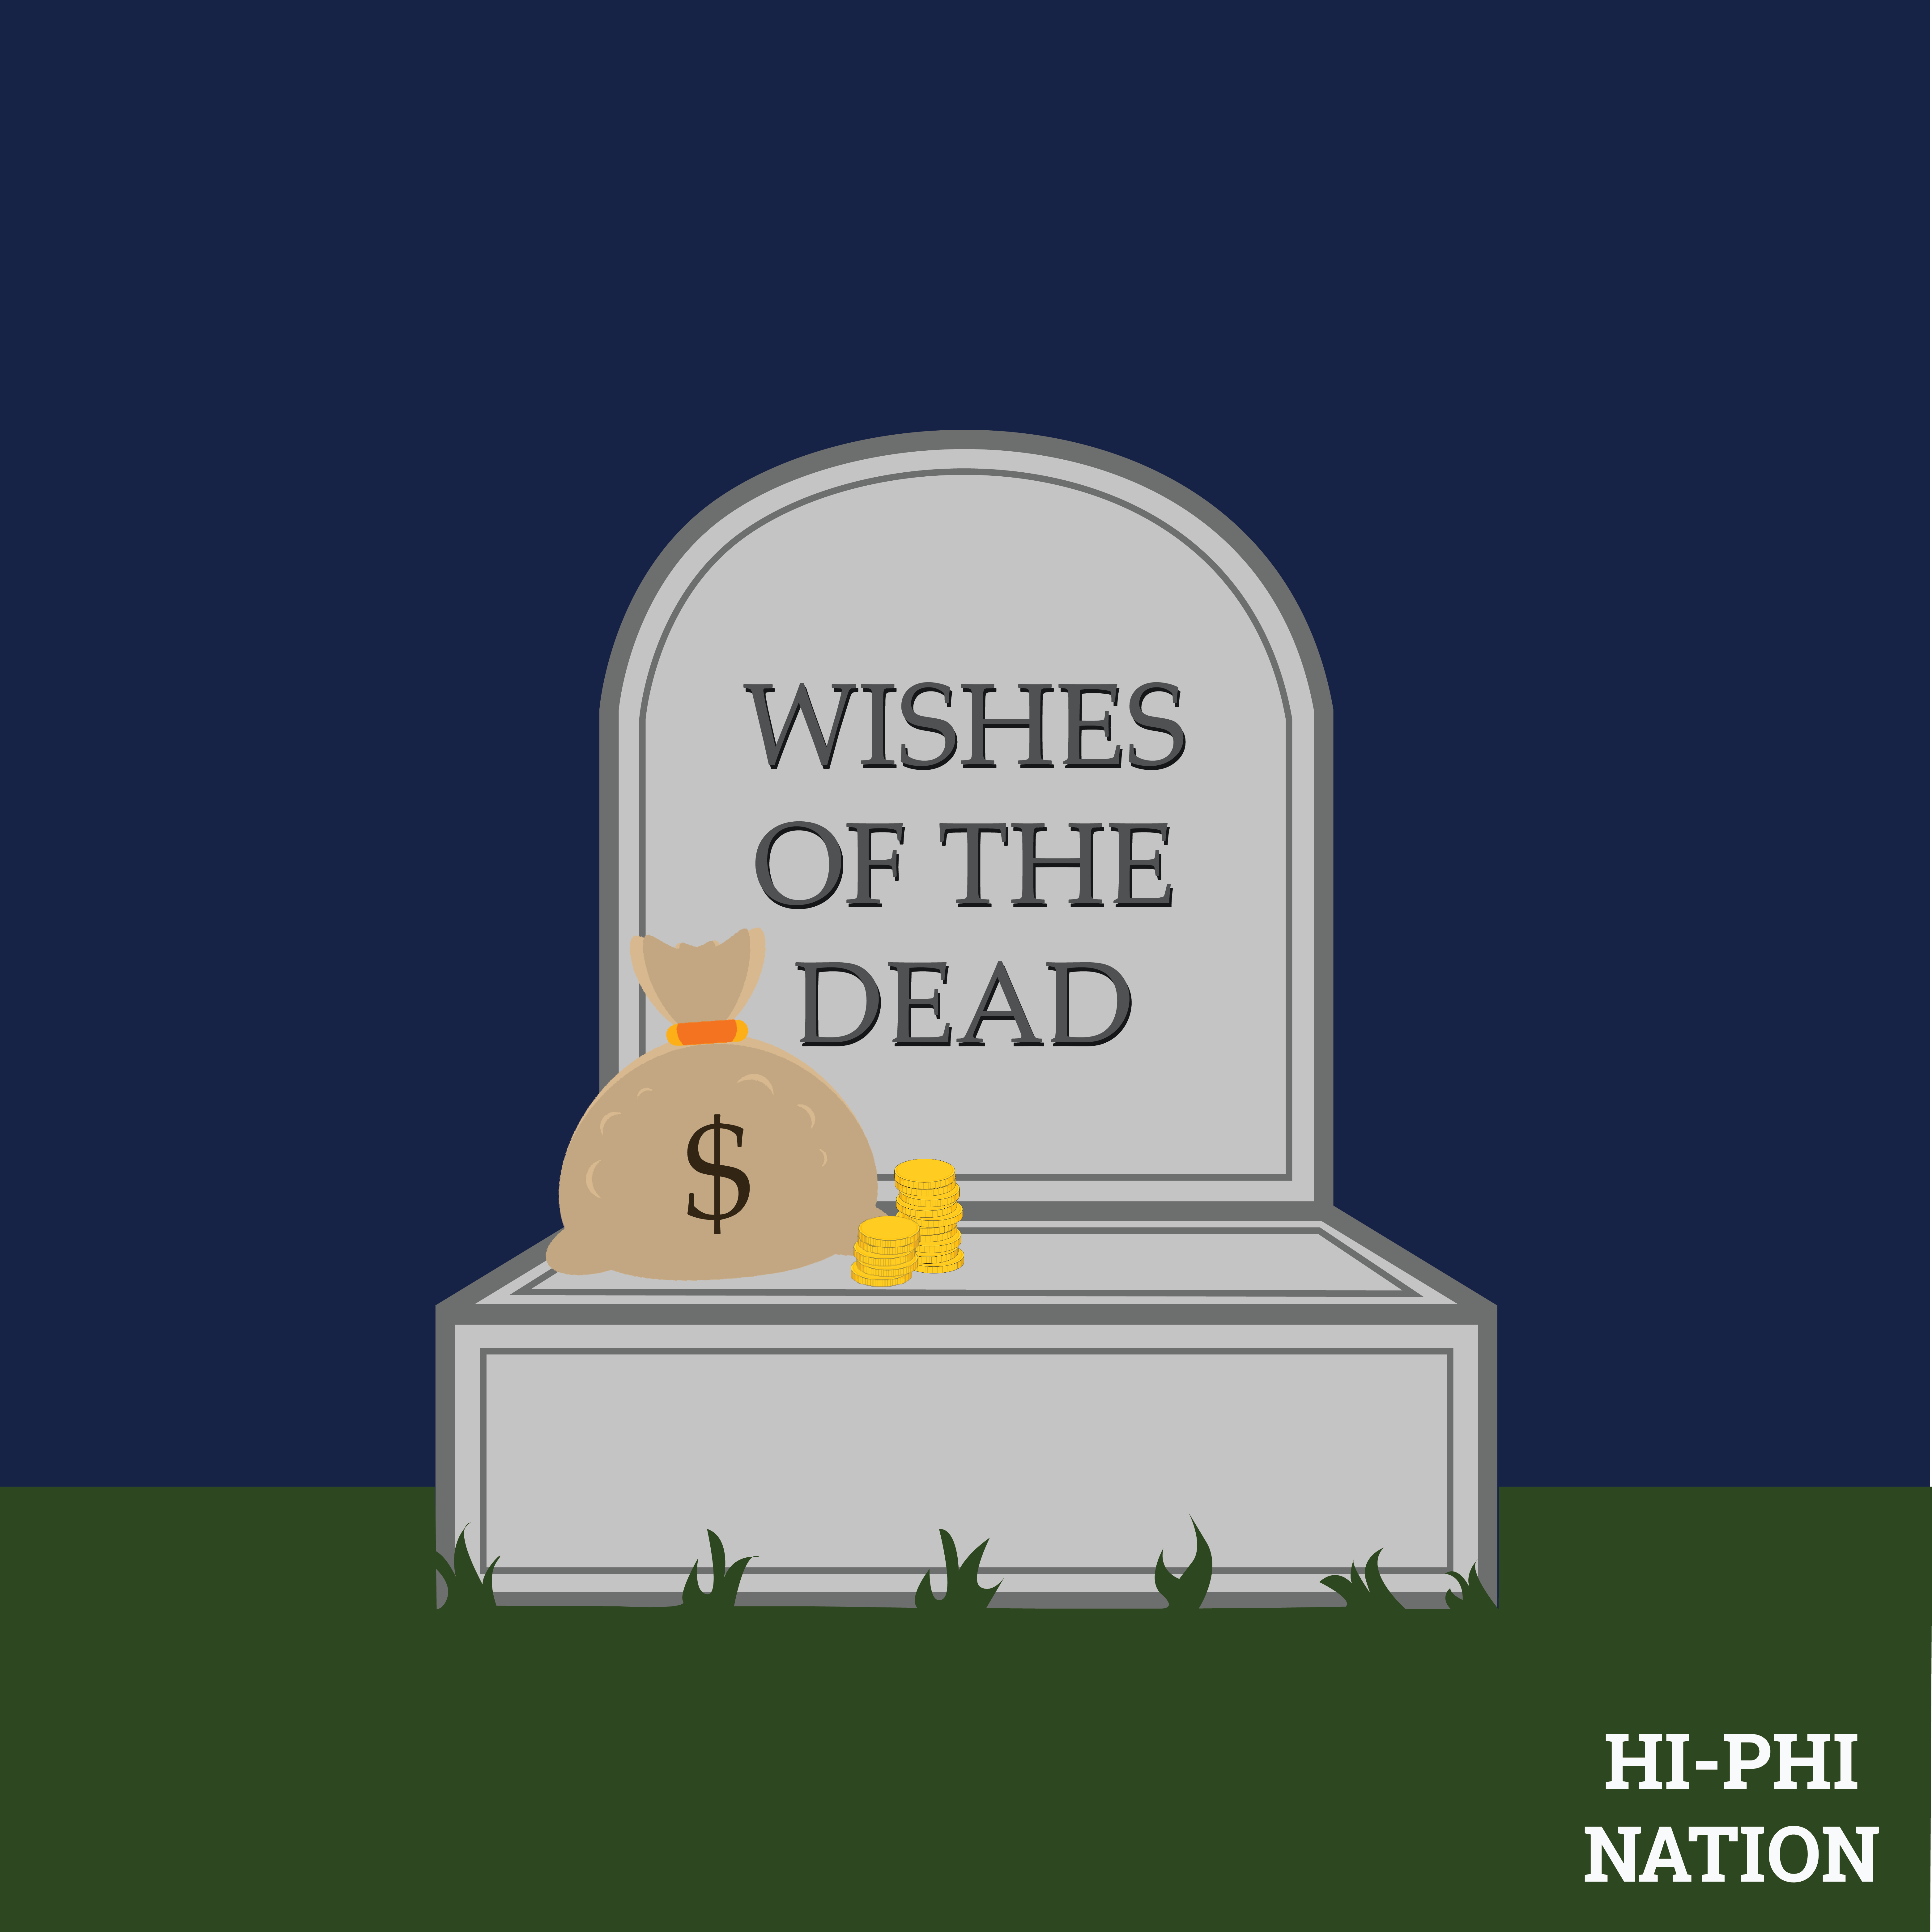 S1, Episode 1: The Wishes of the Dead (Jan. 24, 2017) – Hi-Phi Nation